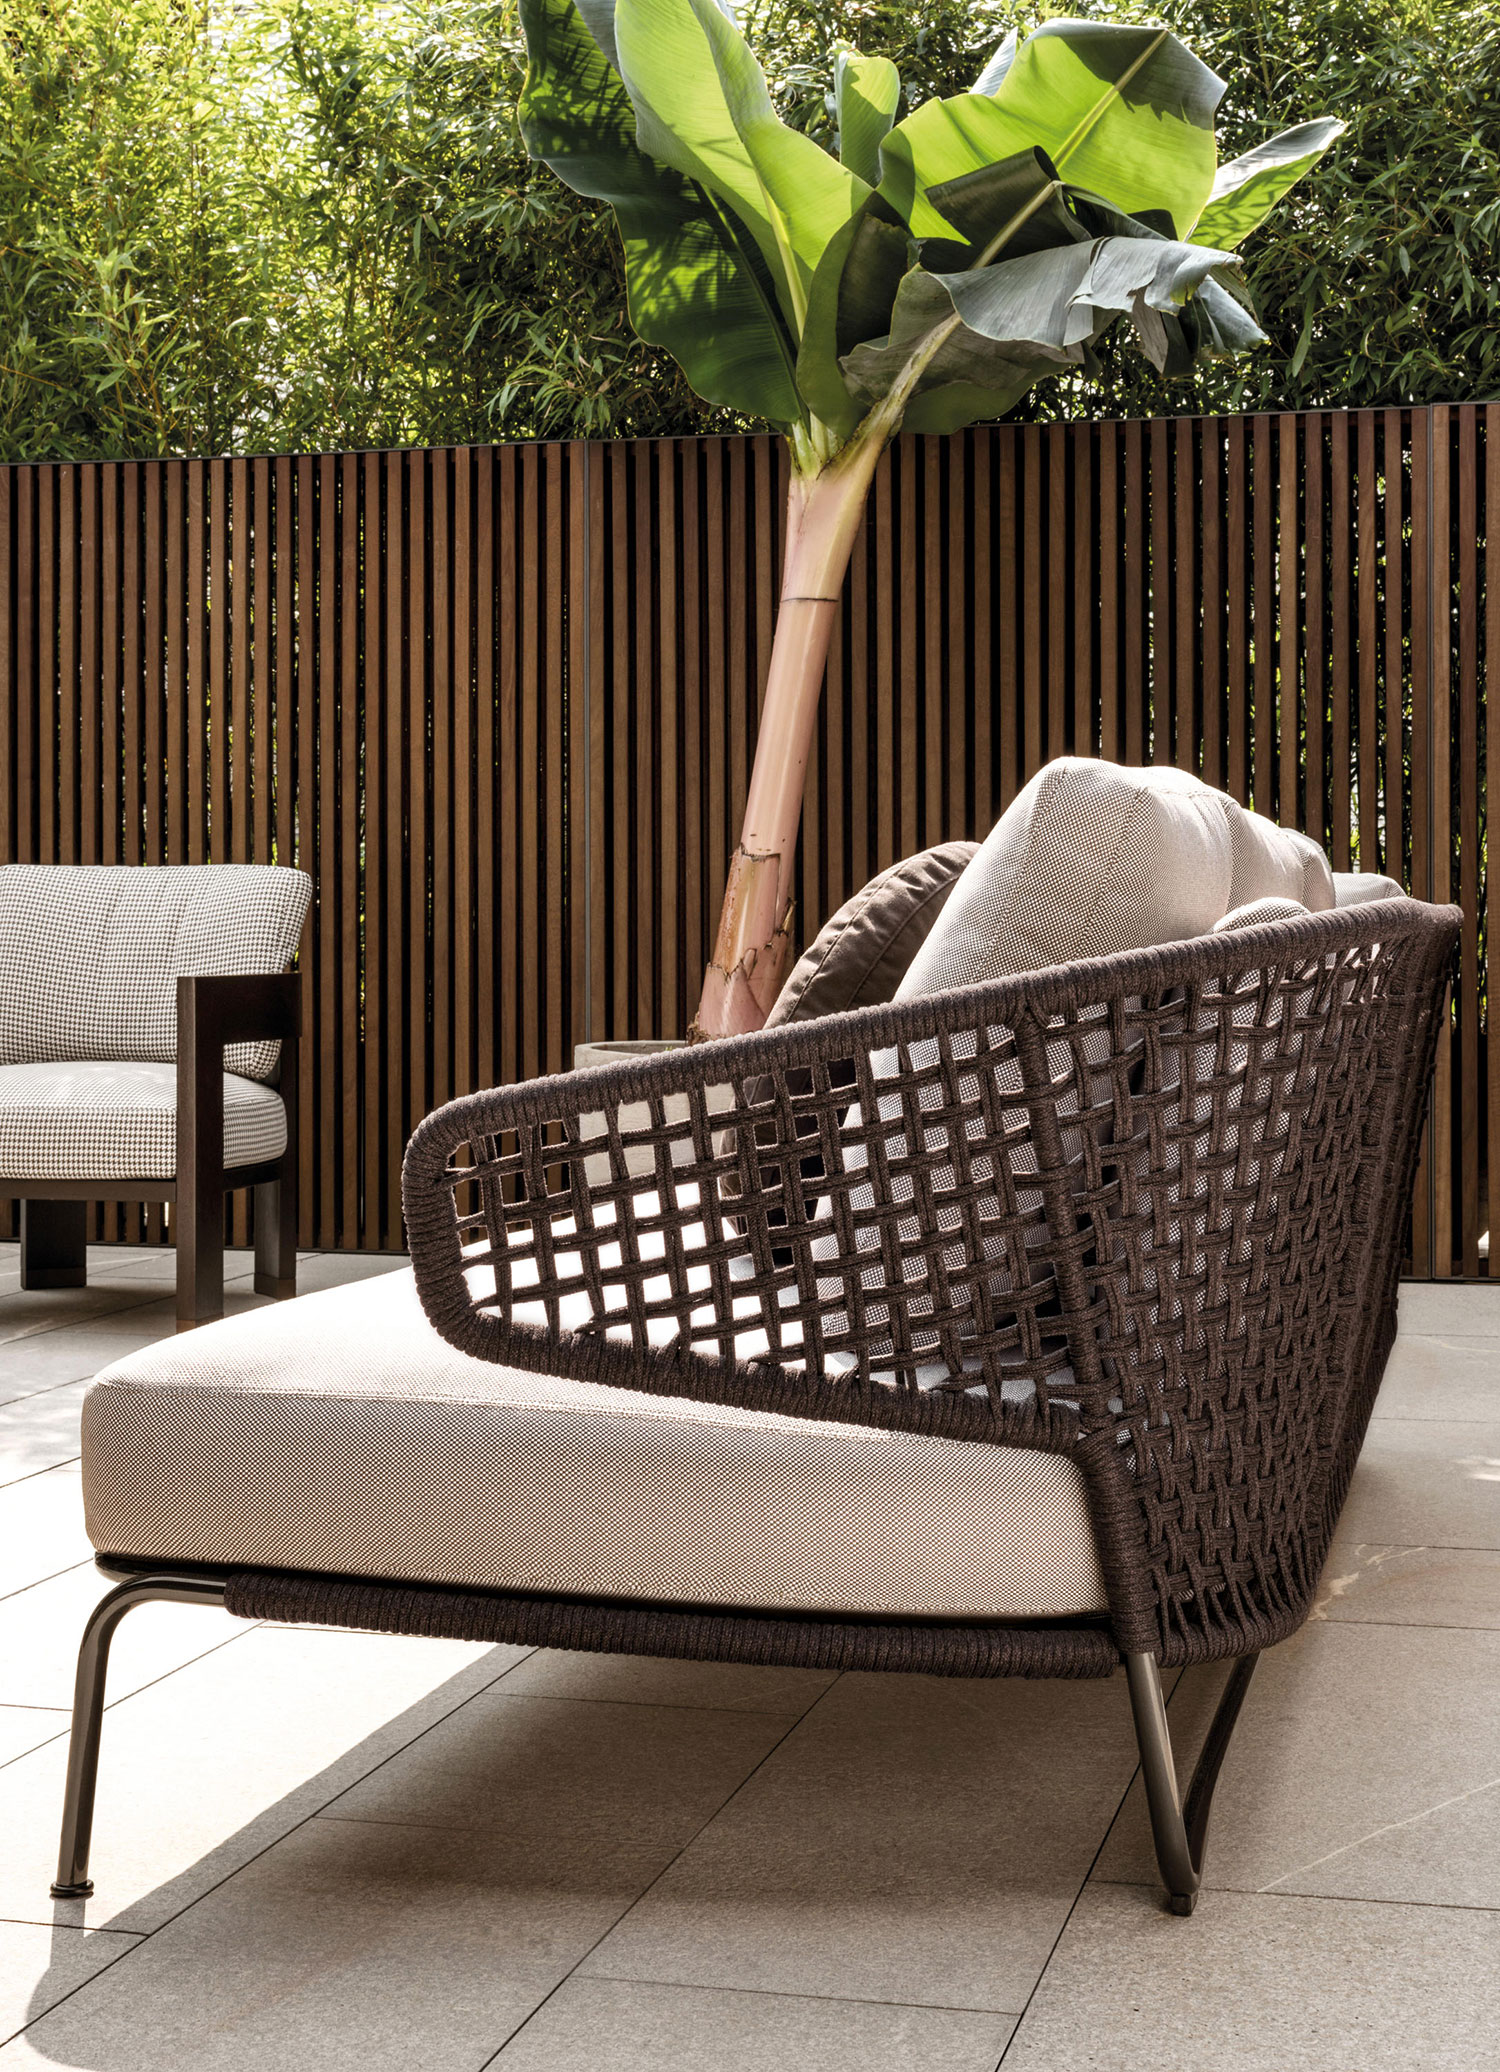 How to Take Care of Your Outdoor Fabrics